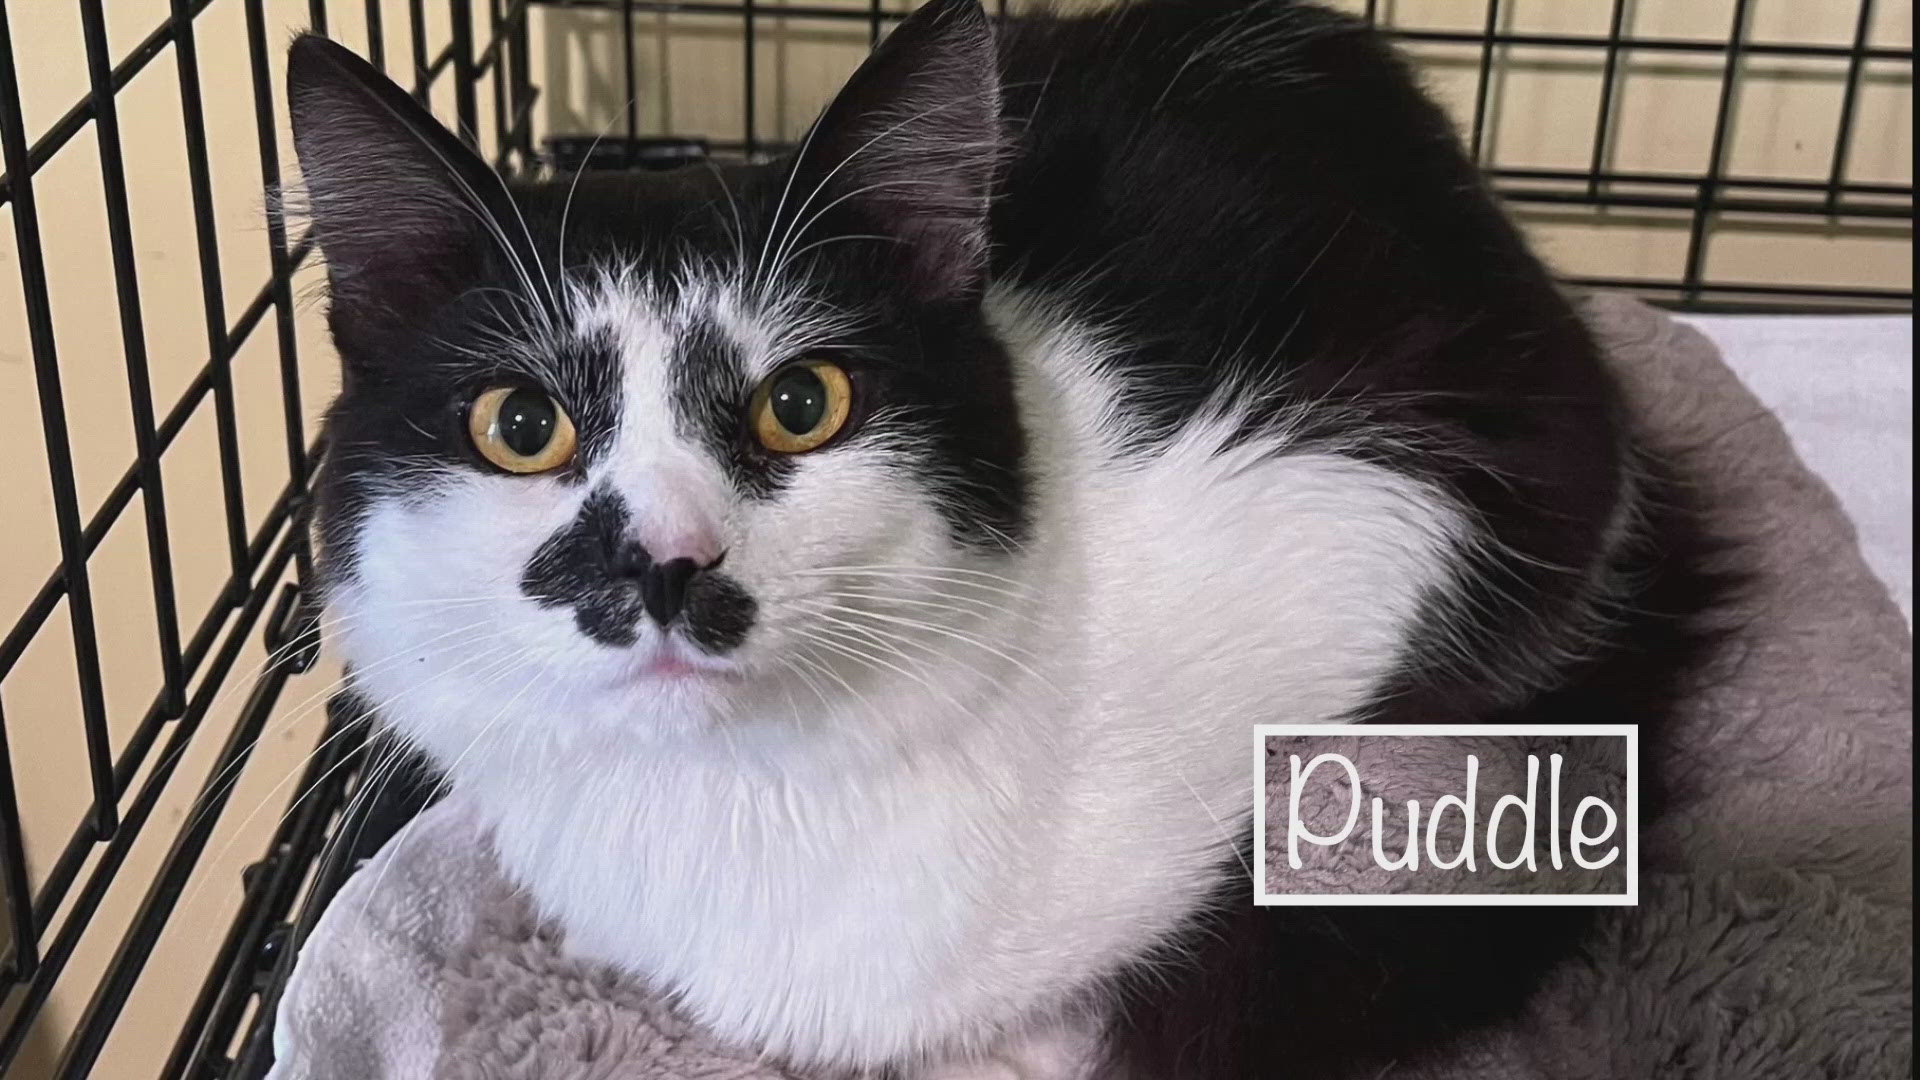 Let's get Puddle adopted!